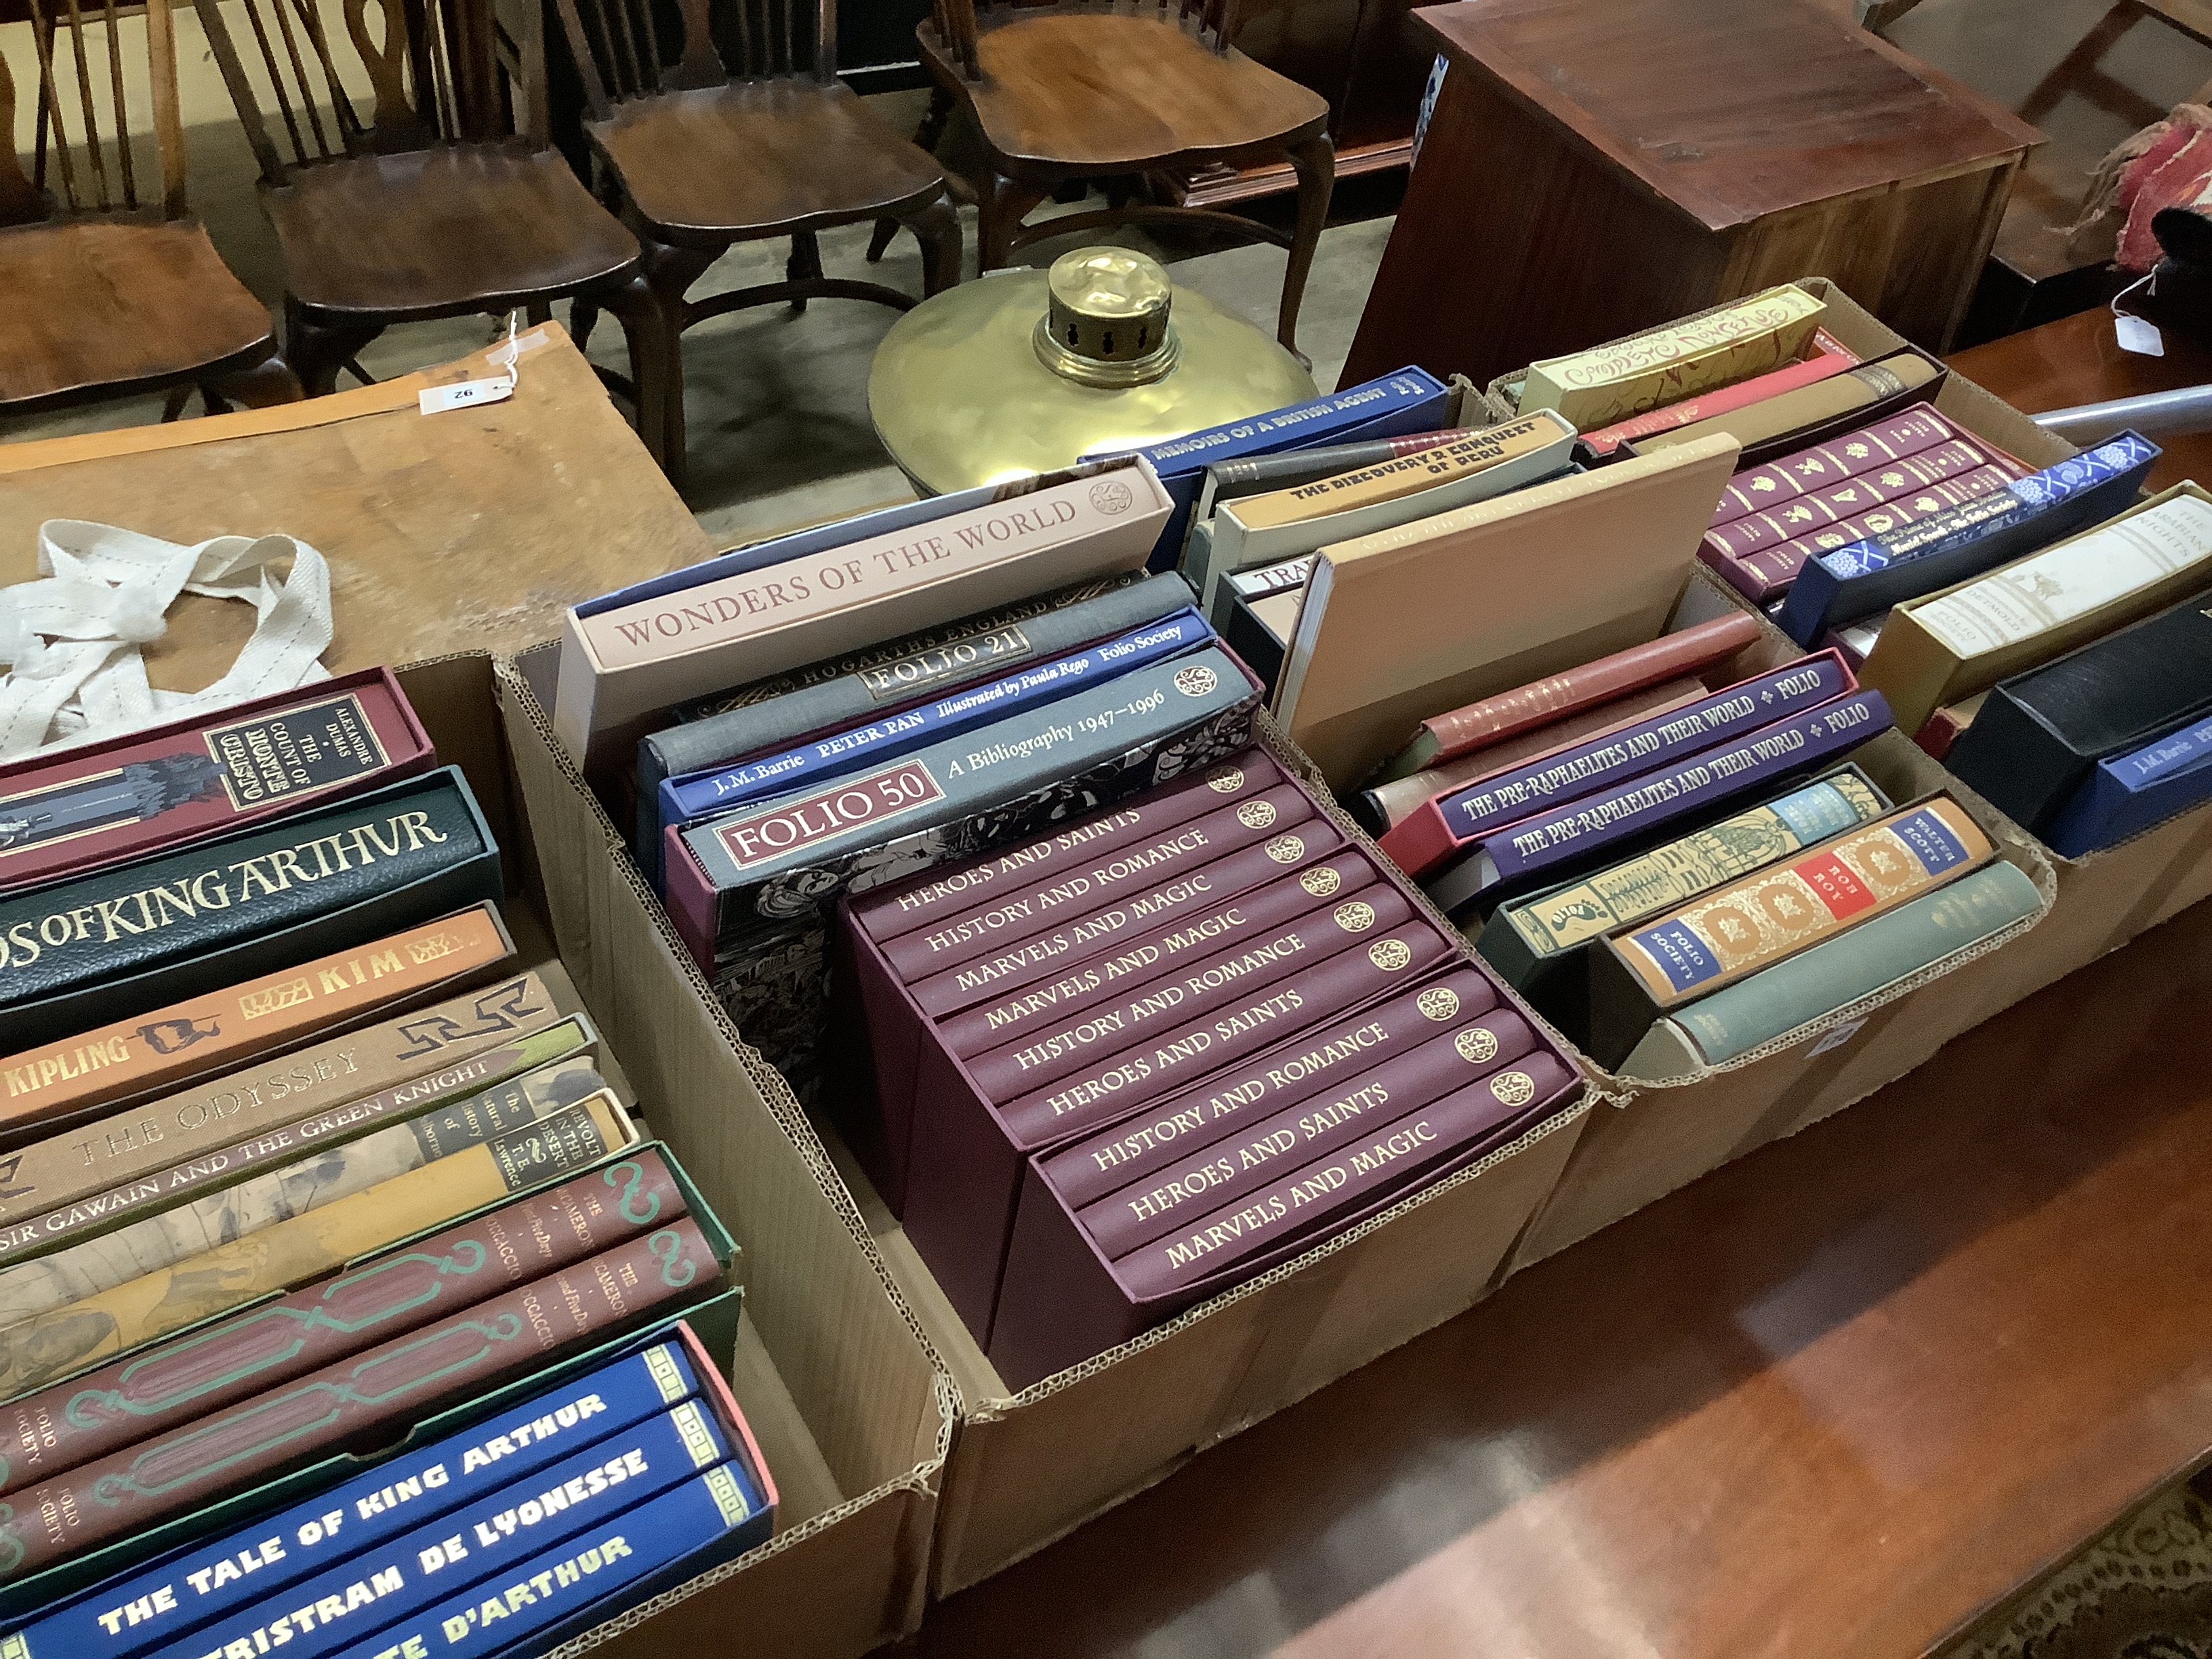 Folio Society books - approx. 55 volumes, to include Dumas, Austen and Walter Scott                                                                                                                                         